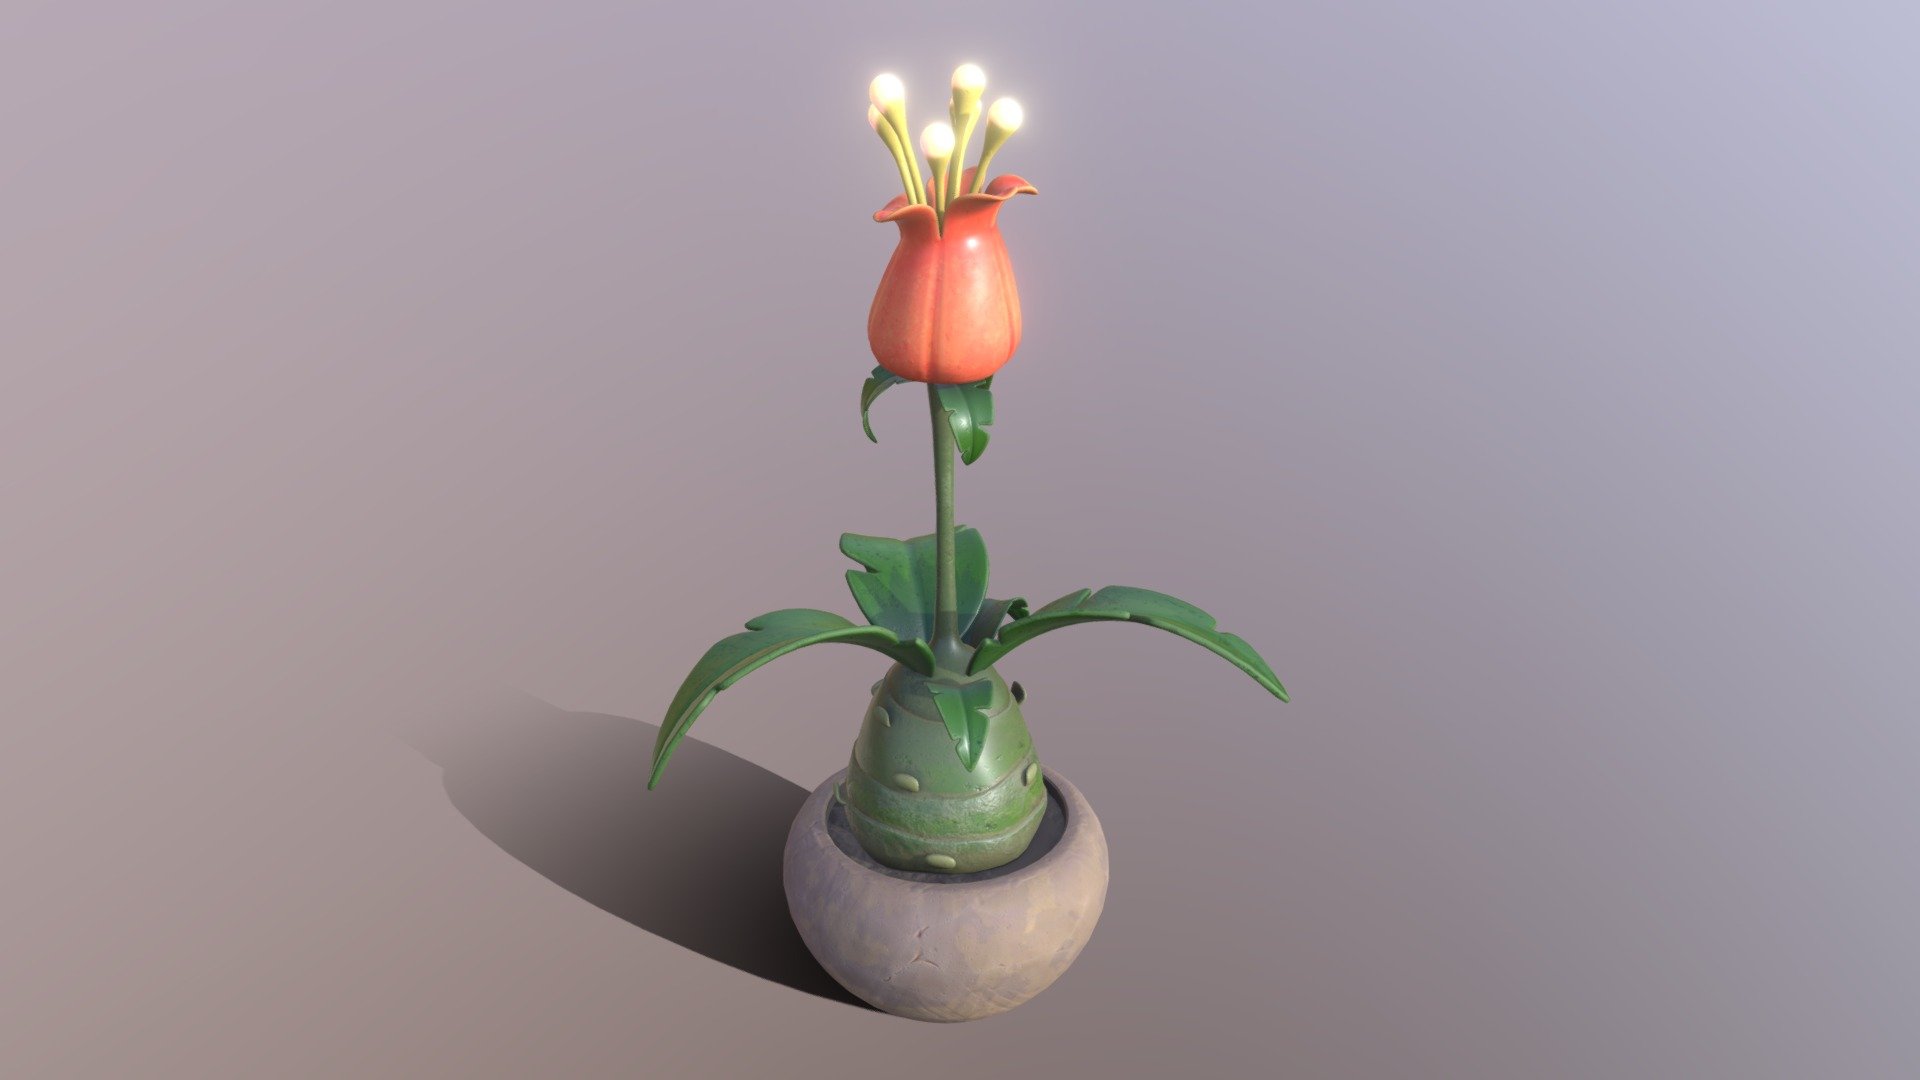 Simple low-poly game-ready Stylized Fantasy Plant model made in 3ds Max 2022 and textured in Substance Painter. Model has 17904 polygons and 18044 vertices. Geometry is split into parts, textures are 2k. Renders were made in SP Iray renderer.

Model is inspired by the flower modelled and animated by Zehra Khan: https://www.artstation.com/artwork/d8yEX3 - Stylized Fantasy Plant - 3D model by Art-Teeves 3d model